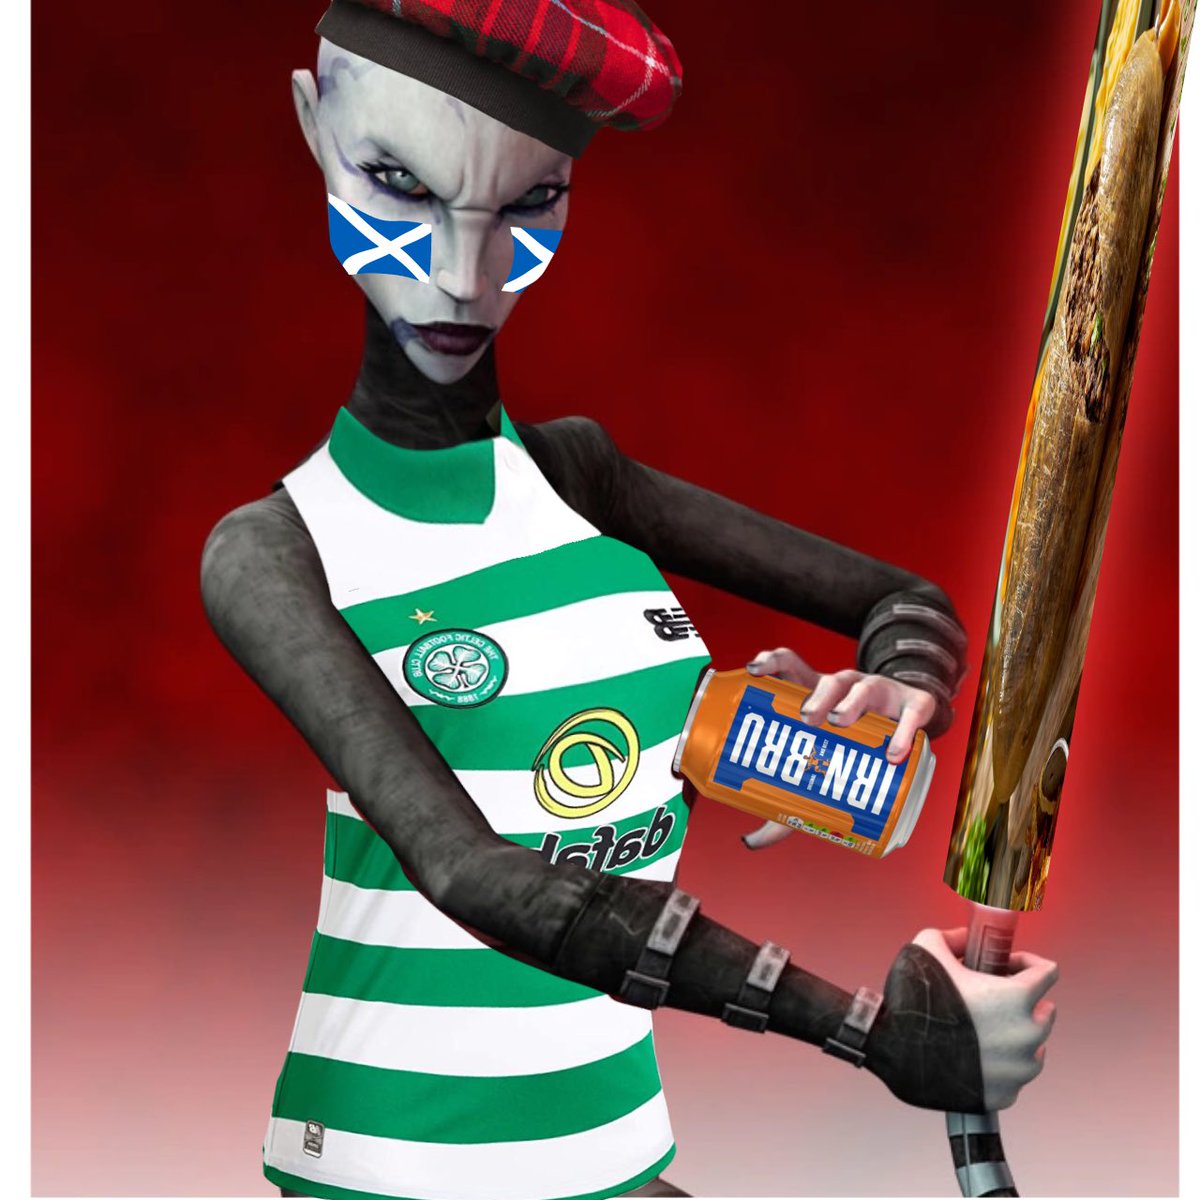 scottish asajj ventress for your consideration. yes her saber is a stretched png of haggis.